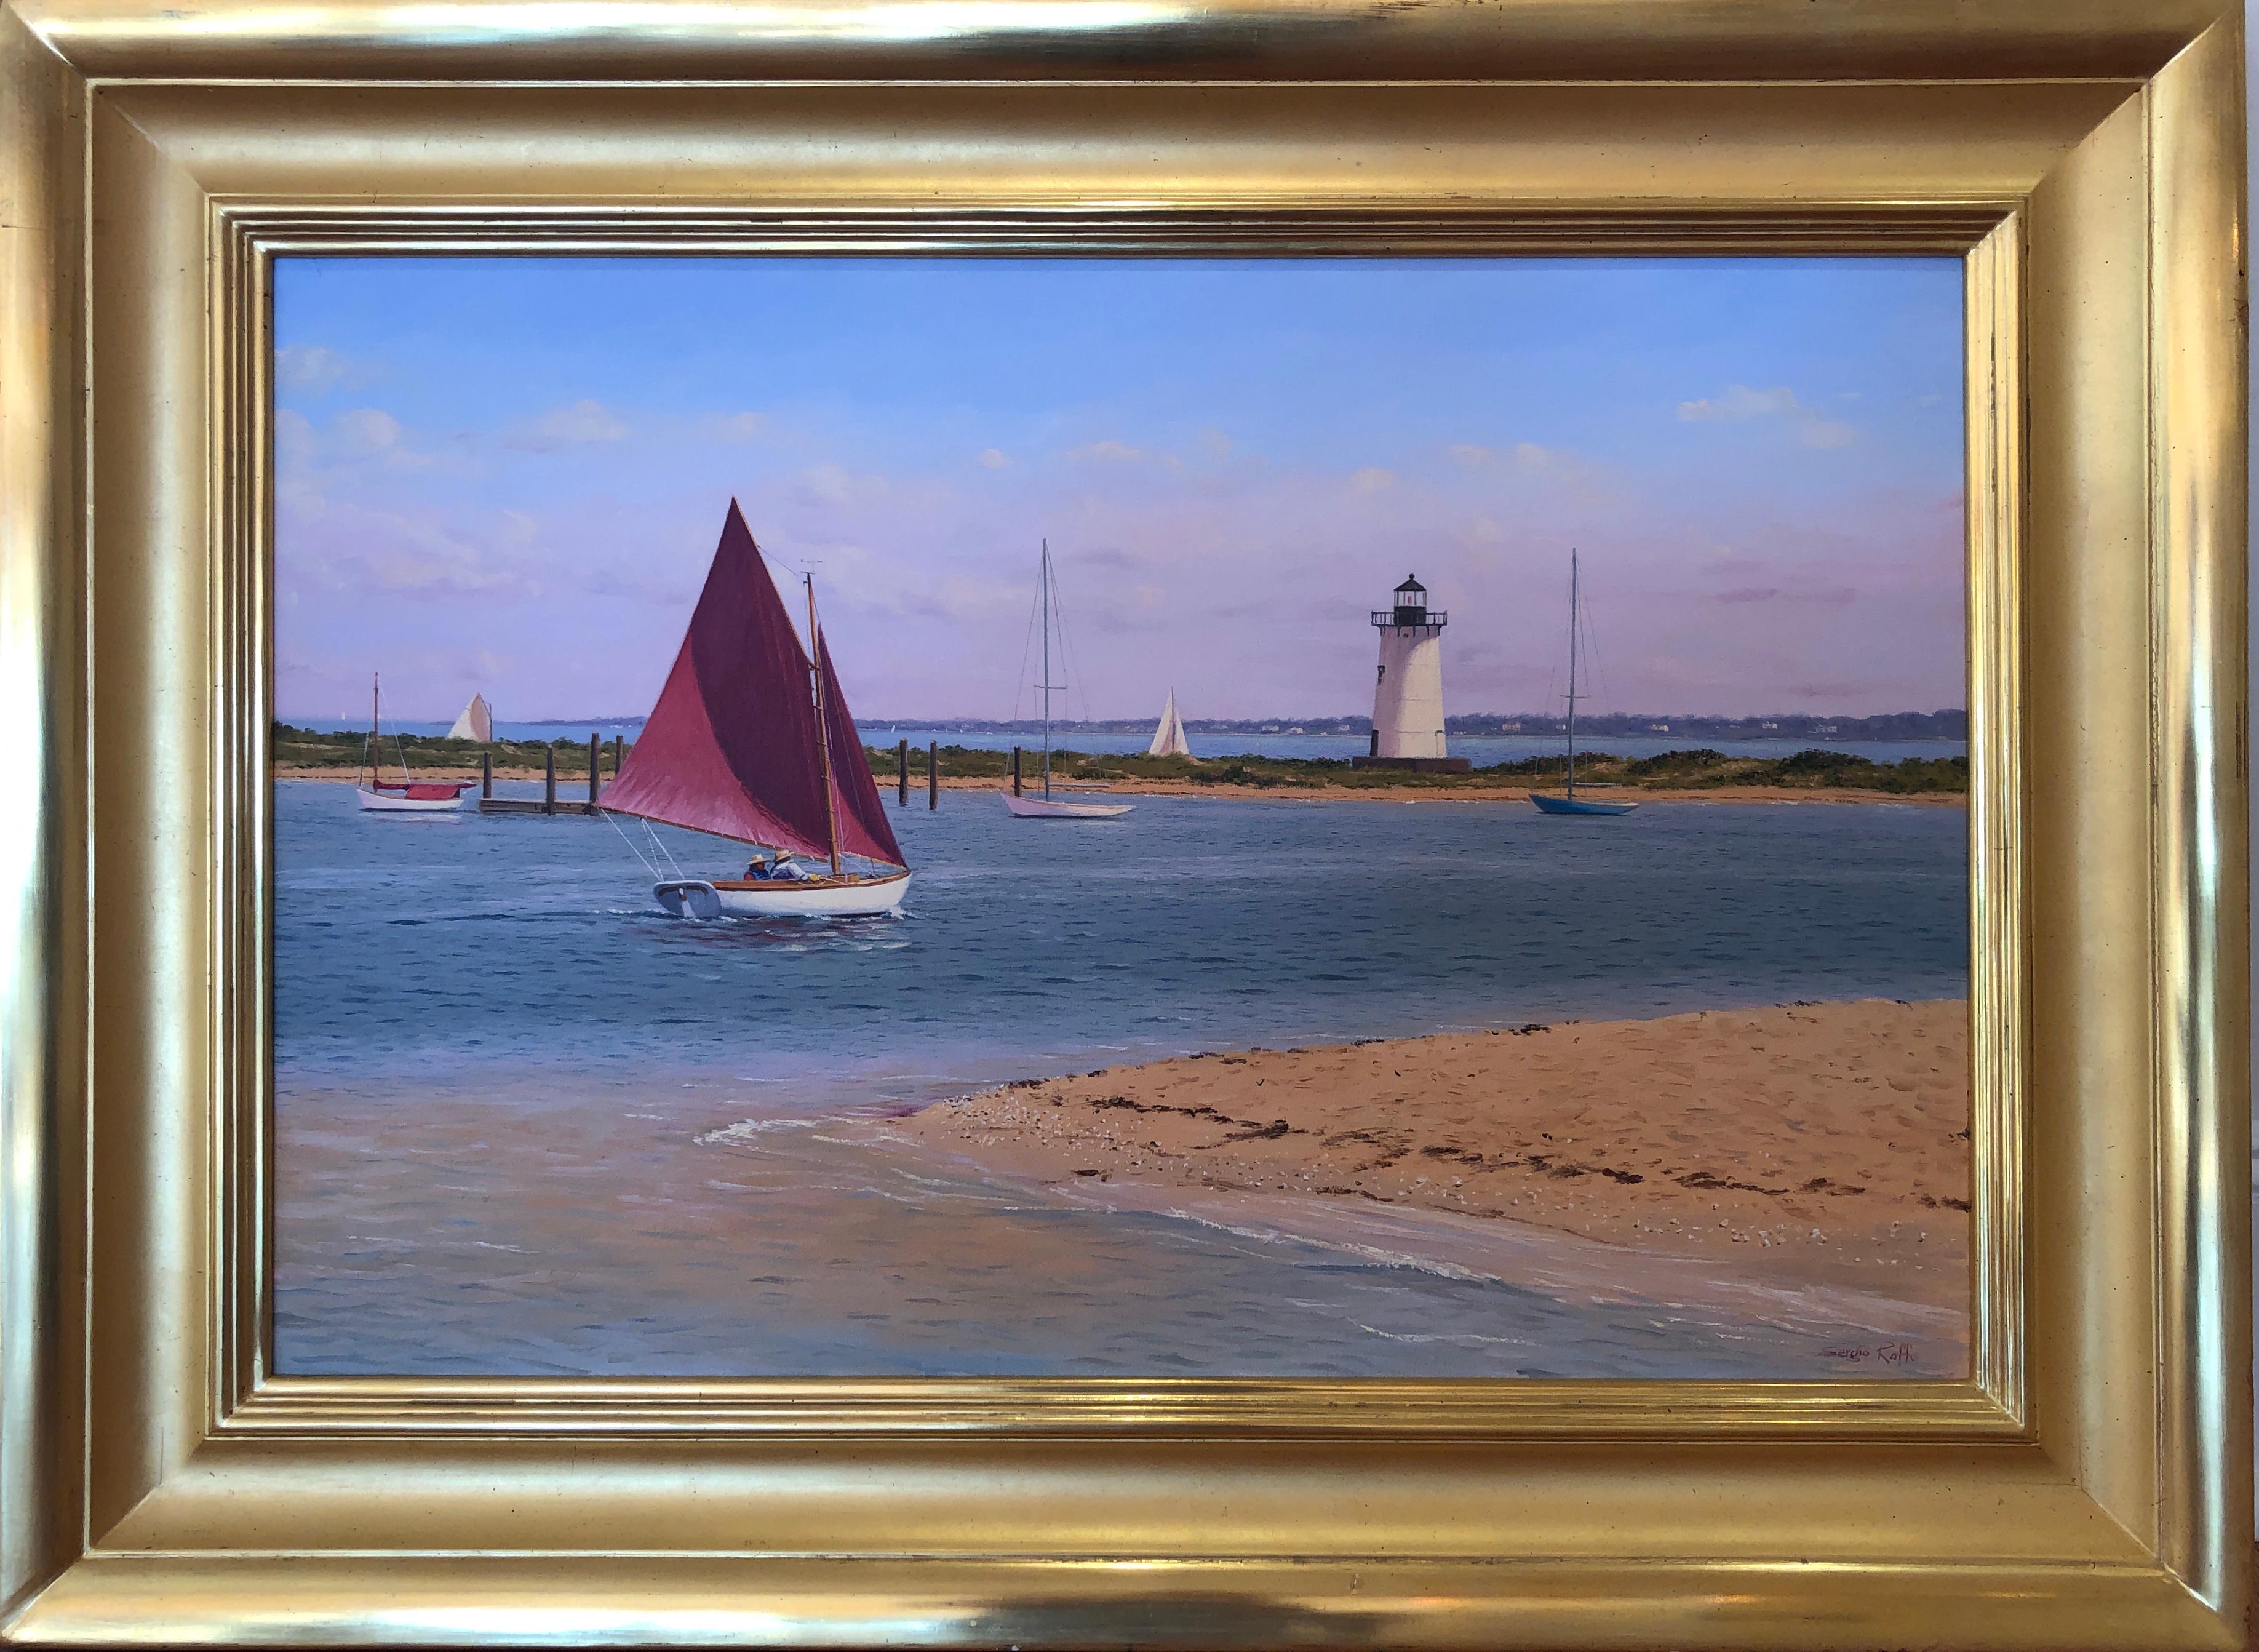 Sergio Roffo Landscape Painting - SERGIO ROFFO "Sailboat and Vineyard Lighthouse" sunset seascape oil painting 